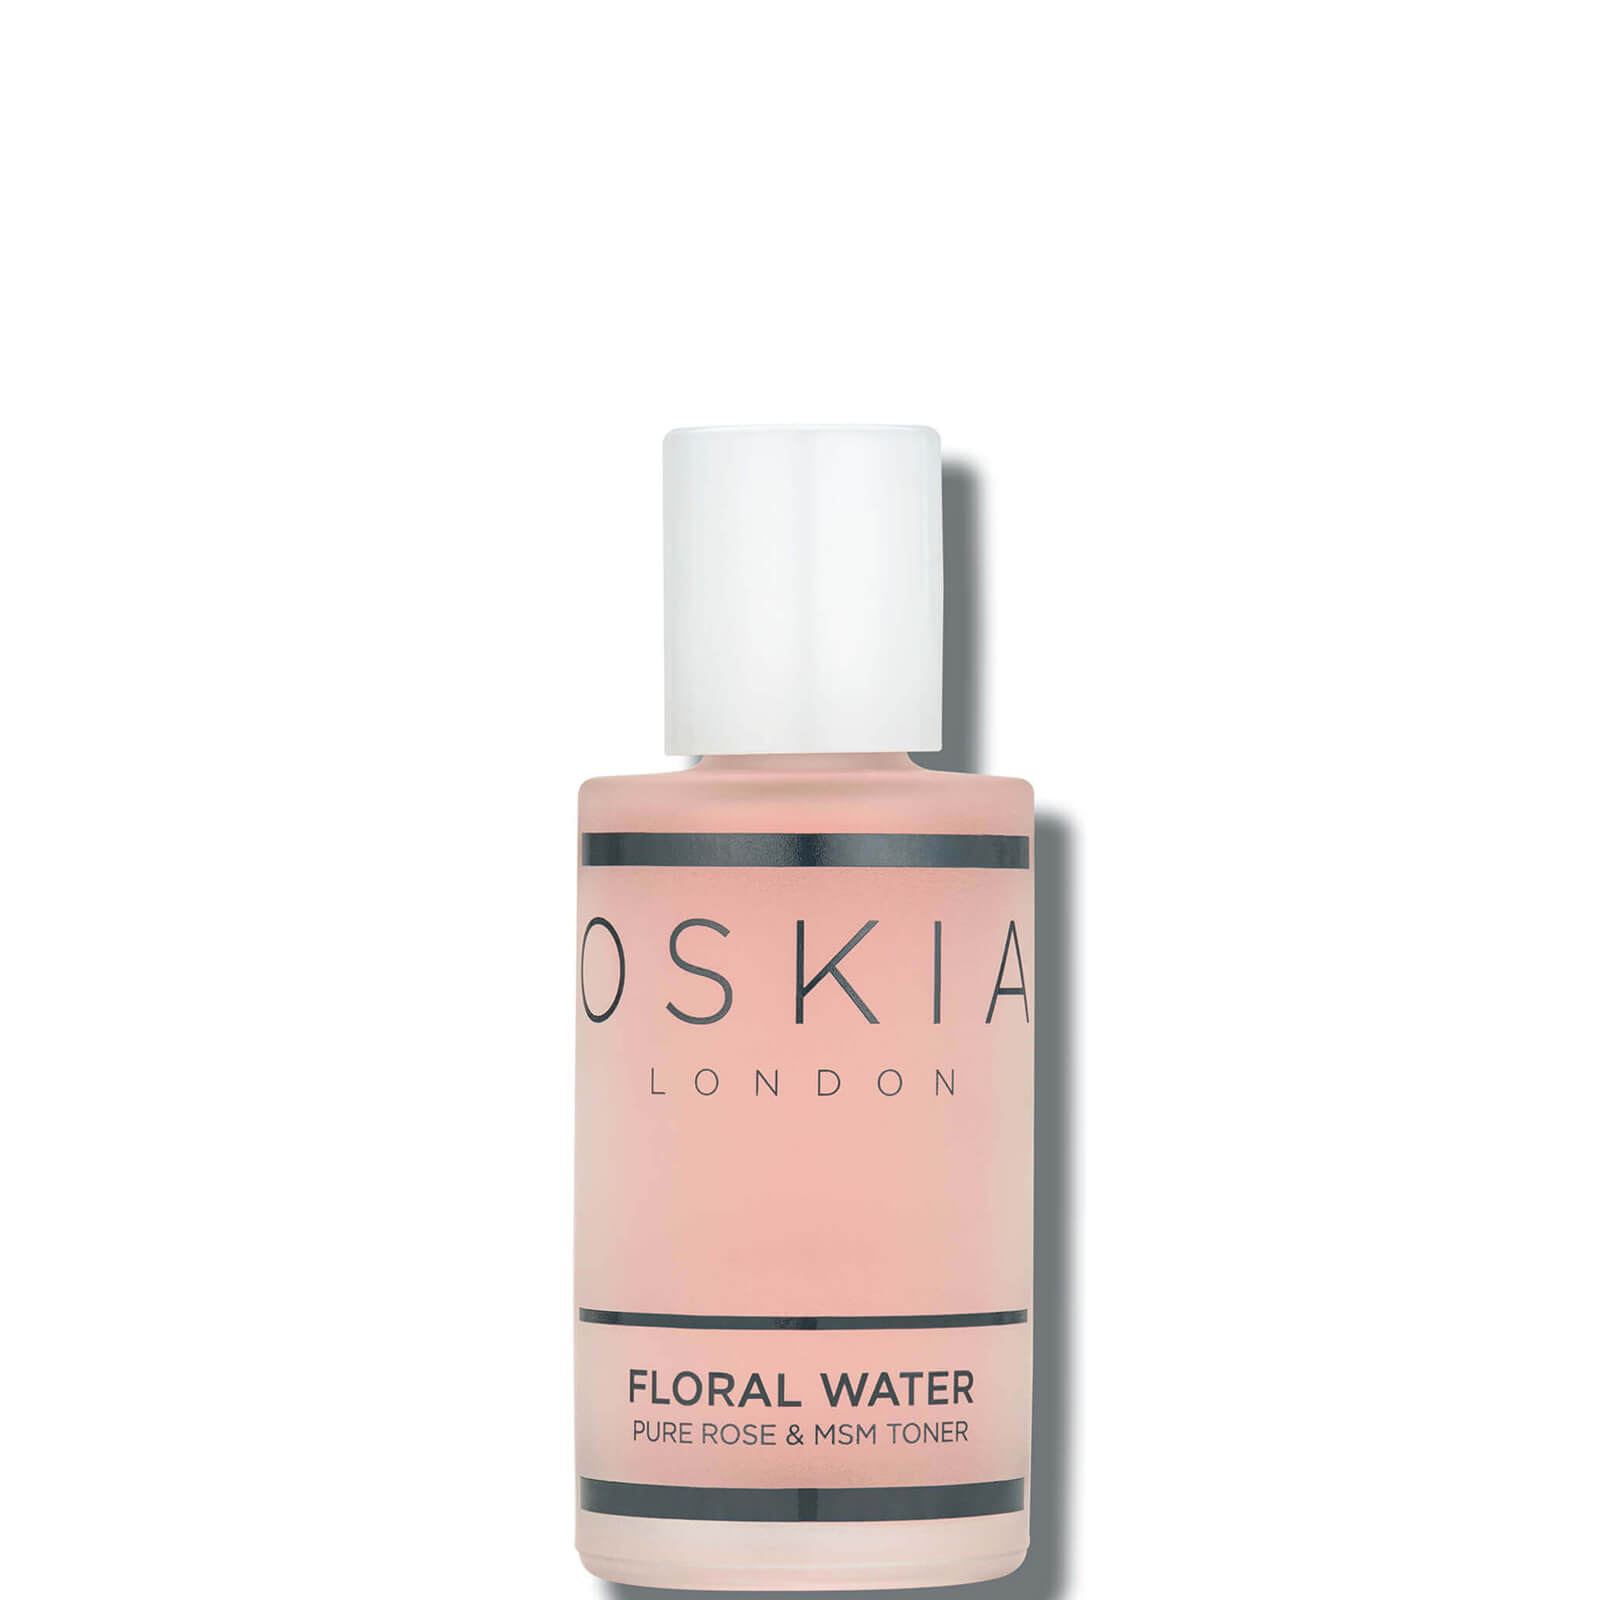 Image of OSKIA Floral Water Toner 30ml